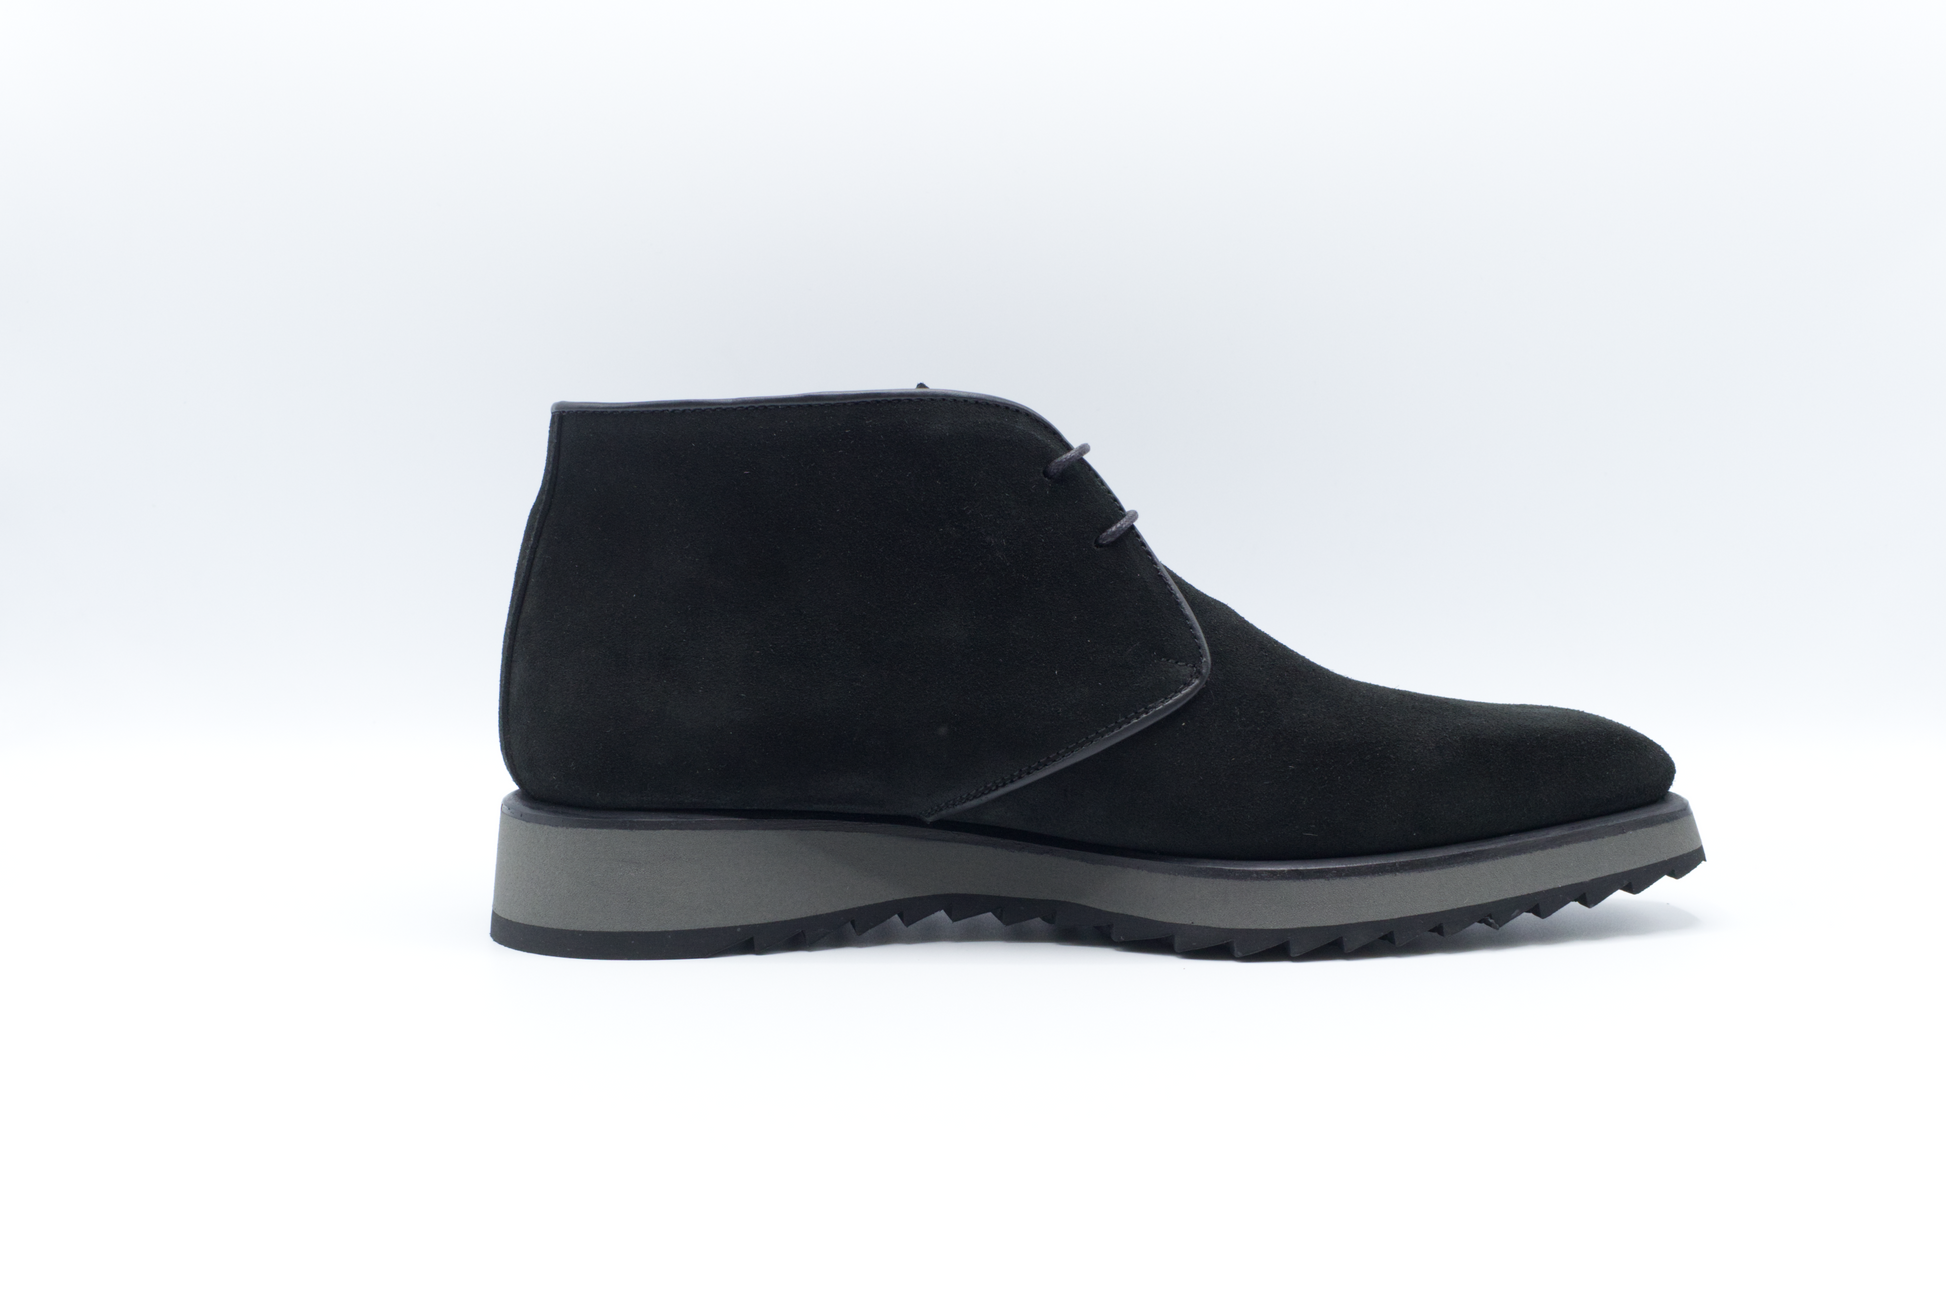 Shop Handmade Italian Men's Suede Chukka Boot in Black or browse our range of hand-made Italian sneakers for men in leather or suede. We deliver to the USA and Canada & offer multiple payment plans as well as accept multiple safe & secure payment methods. \With exceptional quality and comfort, our boots are perfect for any occasion.  Duedi02